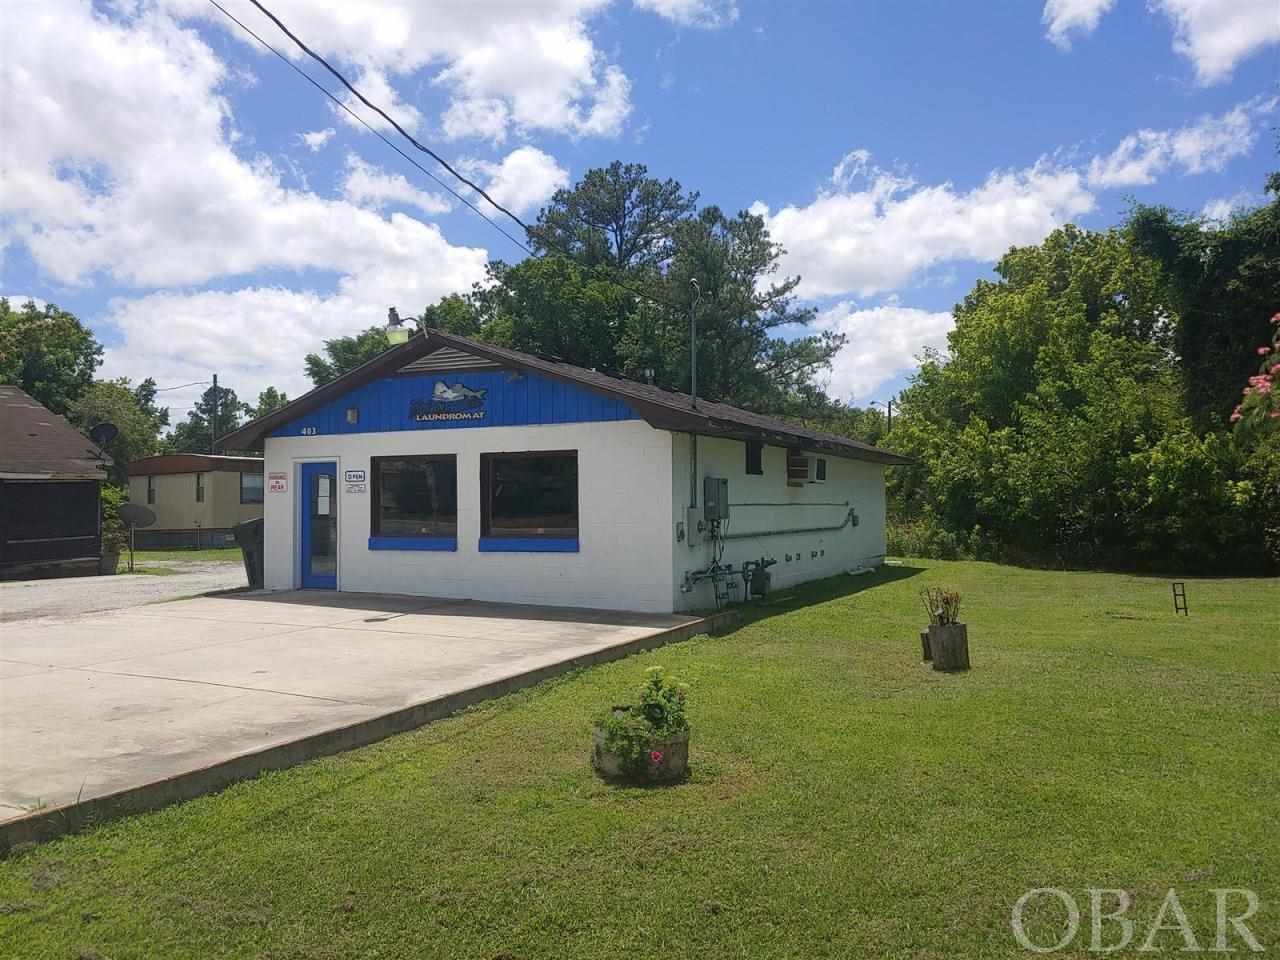 ONLINE BIDDING OPENS JULY 26 at 9:00 am and CLOSES JULY 29 at 11:00 am ET. List price based on tax value. Early offers presented. Income Producing Self-Serve Laundromat, Clean, low maintenance building, extra wooded lot behind Paved parking 5 cars, plus rear grass parking, 10 washers/dryers, low annual utilities. Here's a very affordable way to run your own business! Low maintenance, cinderblock building with concrete slab floor. Regular cash flow +/- $2,000 gross income per month. Rinnai tankless natural gas on-demand hot water heater, 2 wall-mounted split HVAC units, 10 Whirlpool Washers and dryers, local repair technician Upside potential: Fix existing soda machine, add snack machine, add oversize washer/dryer(s), clear adj lot for rental trailer or other approved use.